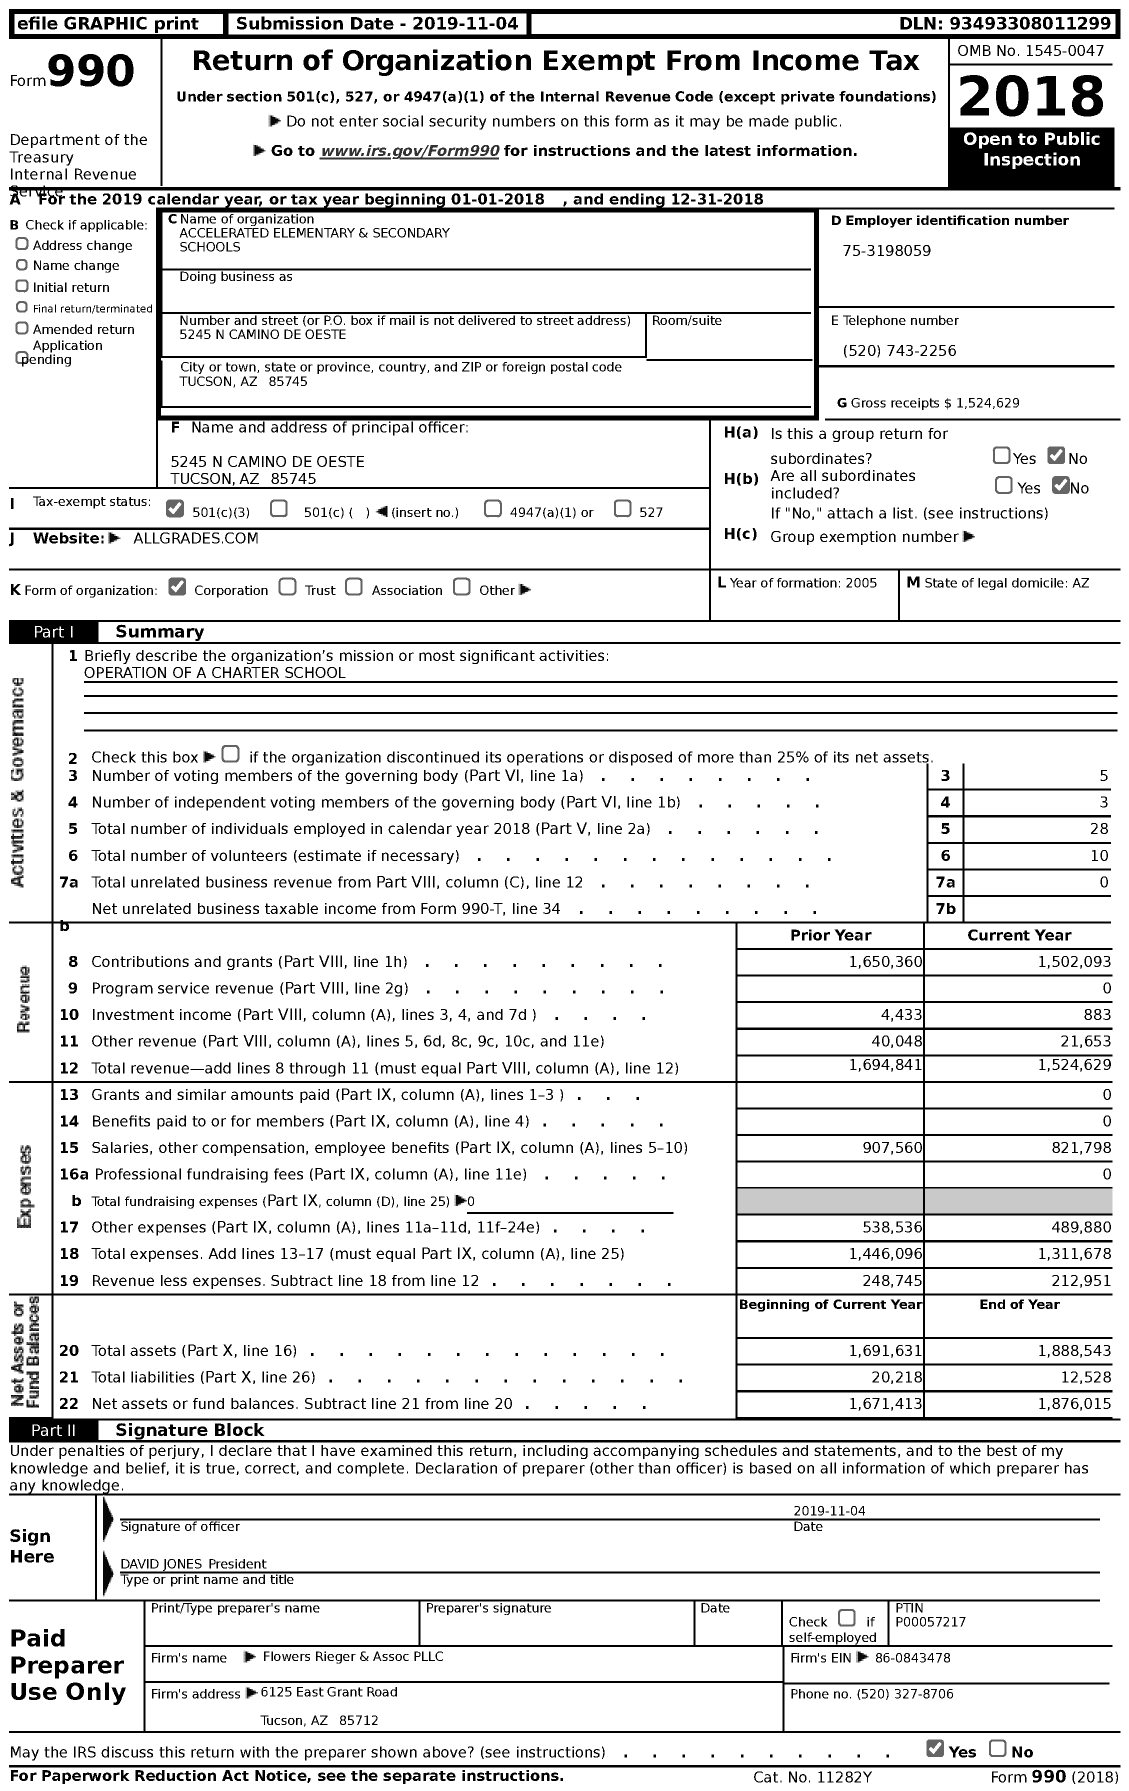 Image of first page of 2018 Form 990 for Accelerated Elementary and Secondary Schools